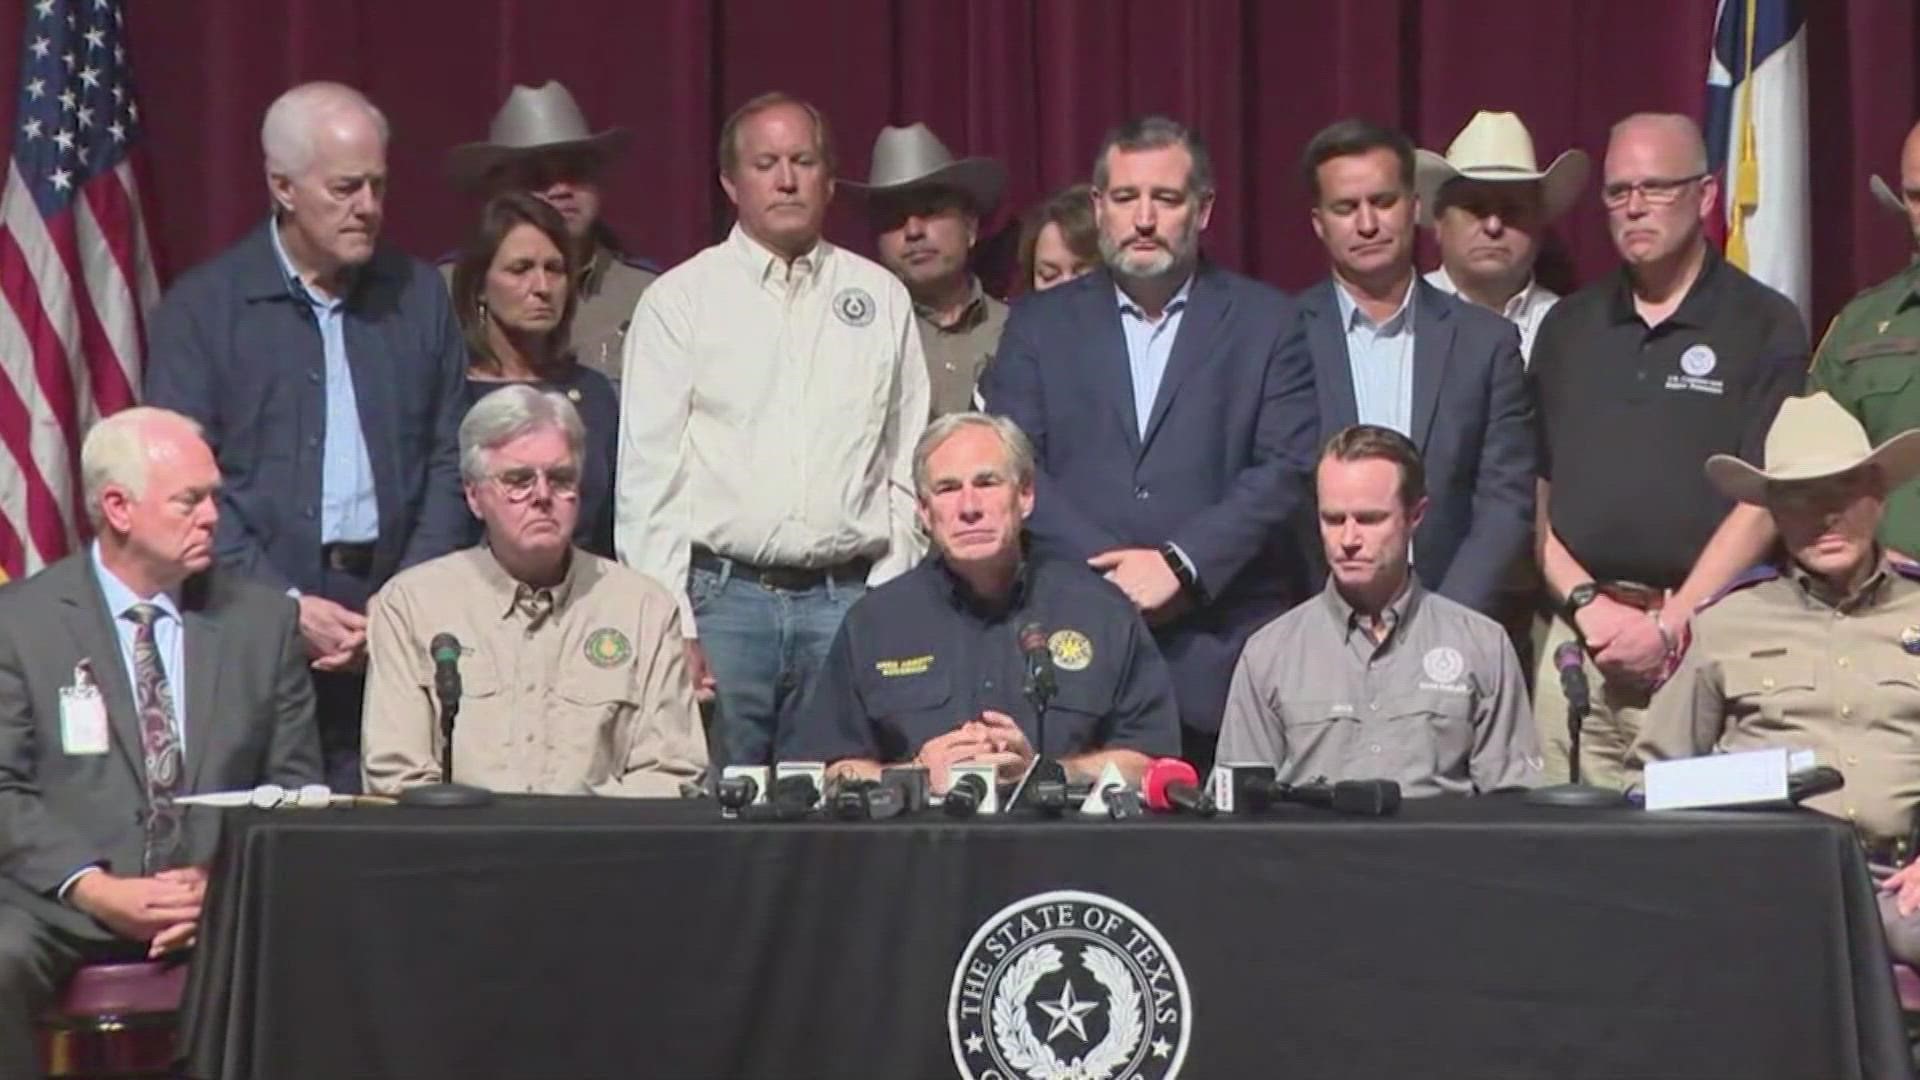 There have been drastic shifts in the narrative surrounding the Uvalde school shooting since initial reports came out.